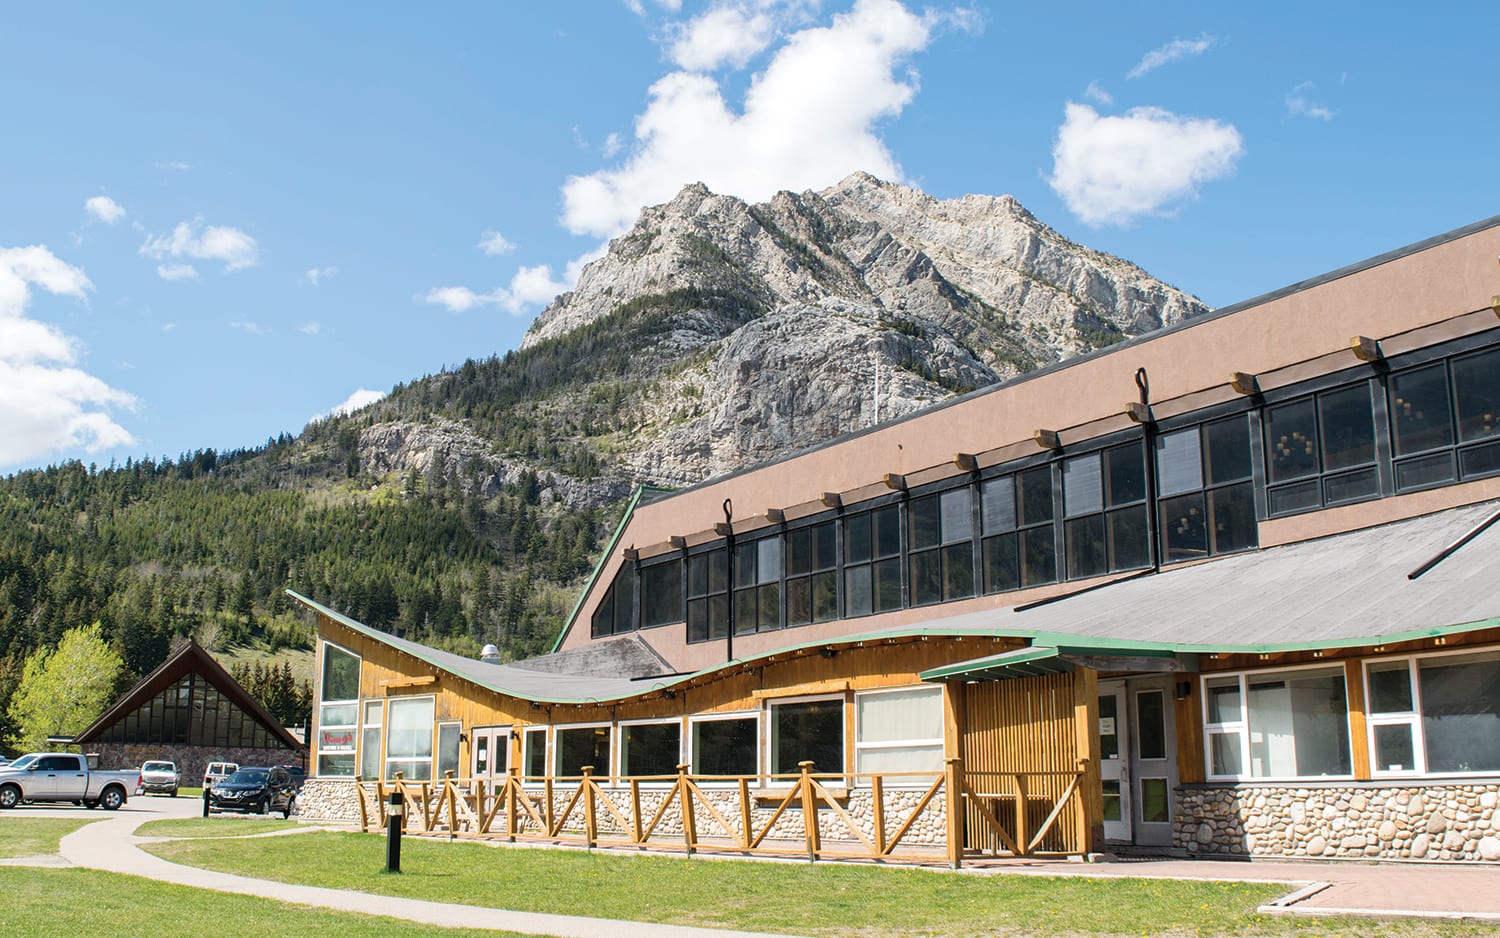 Two-storey wood building in Waterton with mountain behind